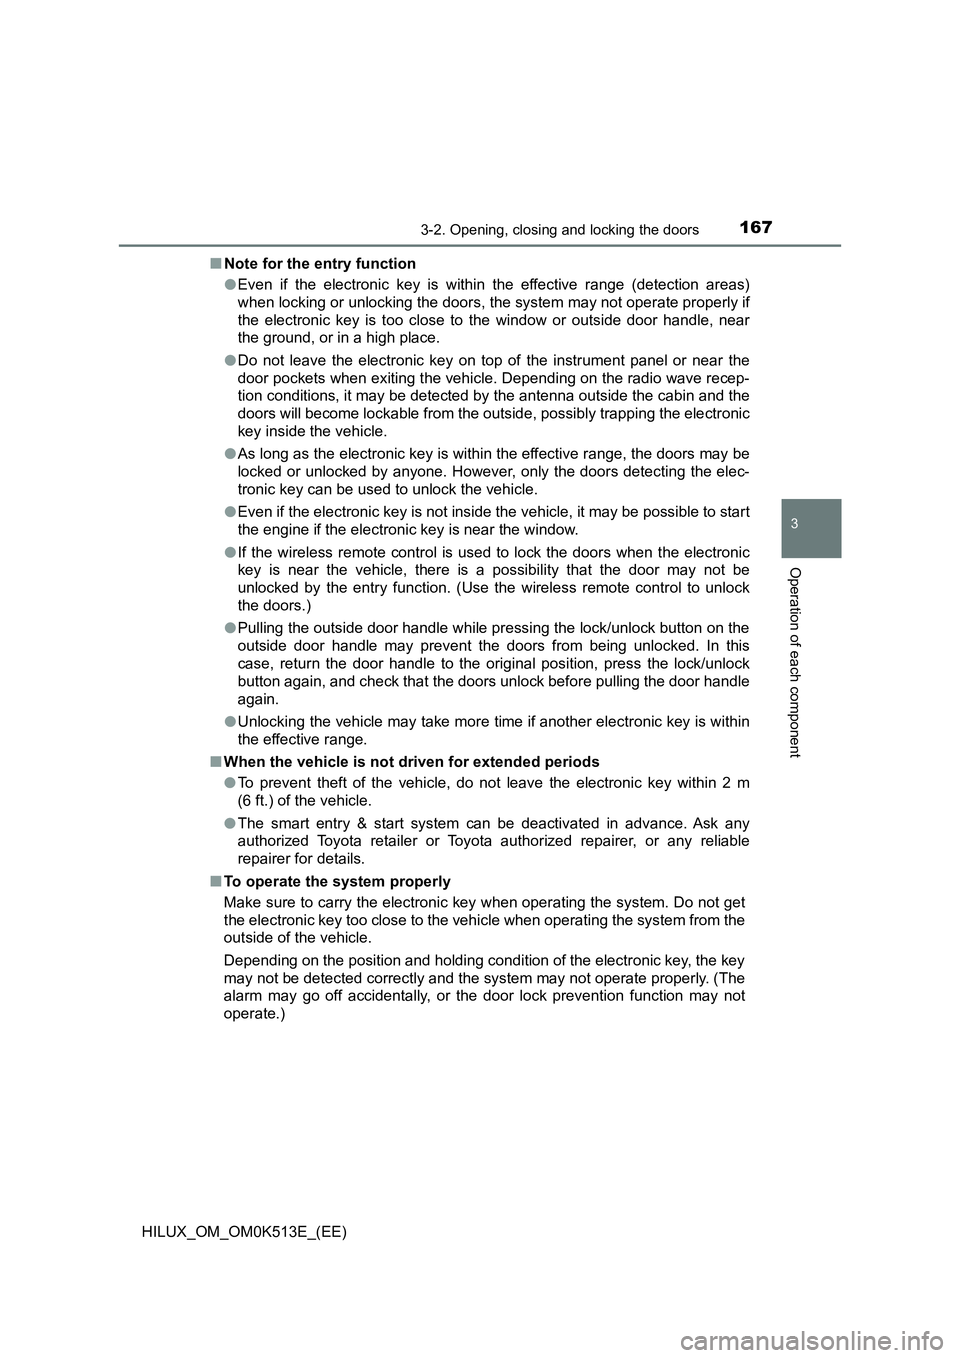 TOYOTA HILUX 2021  Owners Manual (in English) 1673-2. Opening, closing and locking the doors
3
Operation of each component
HILUX_OM_OM0K513E_(EE) 
�Q Note for the entry function 
�O Even if the electronic key is within the effective range (detect